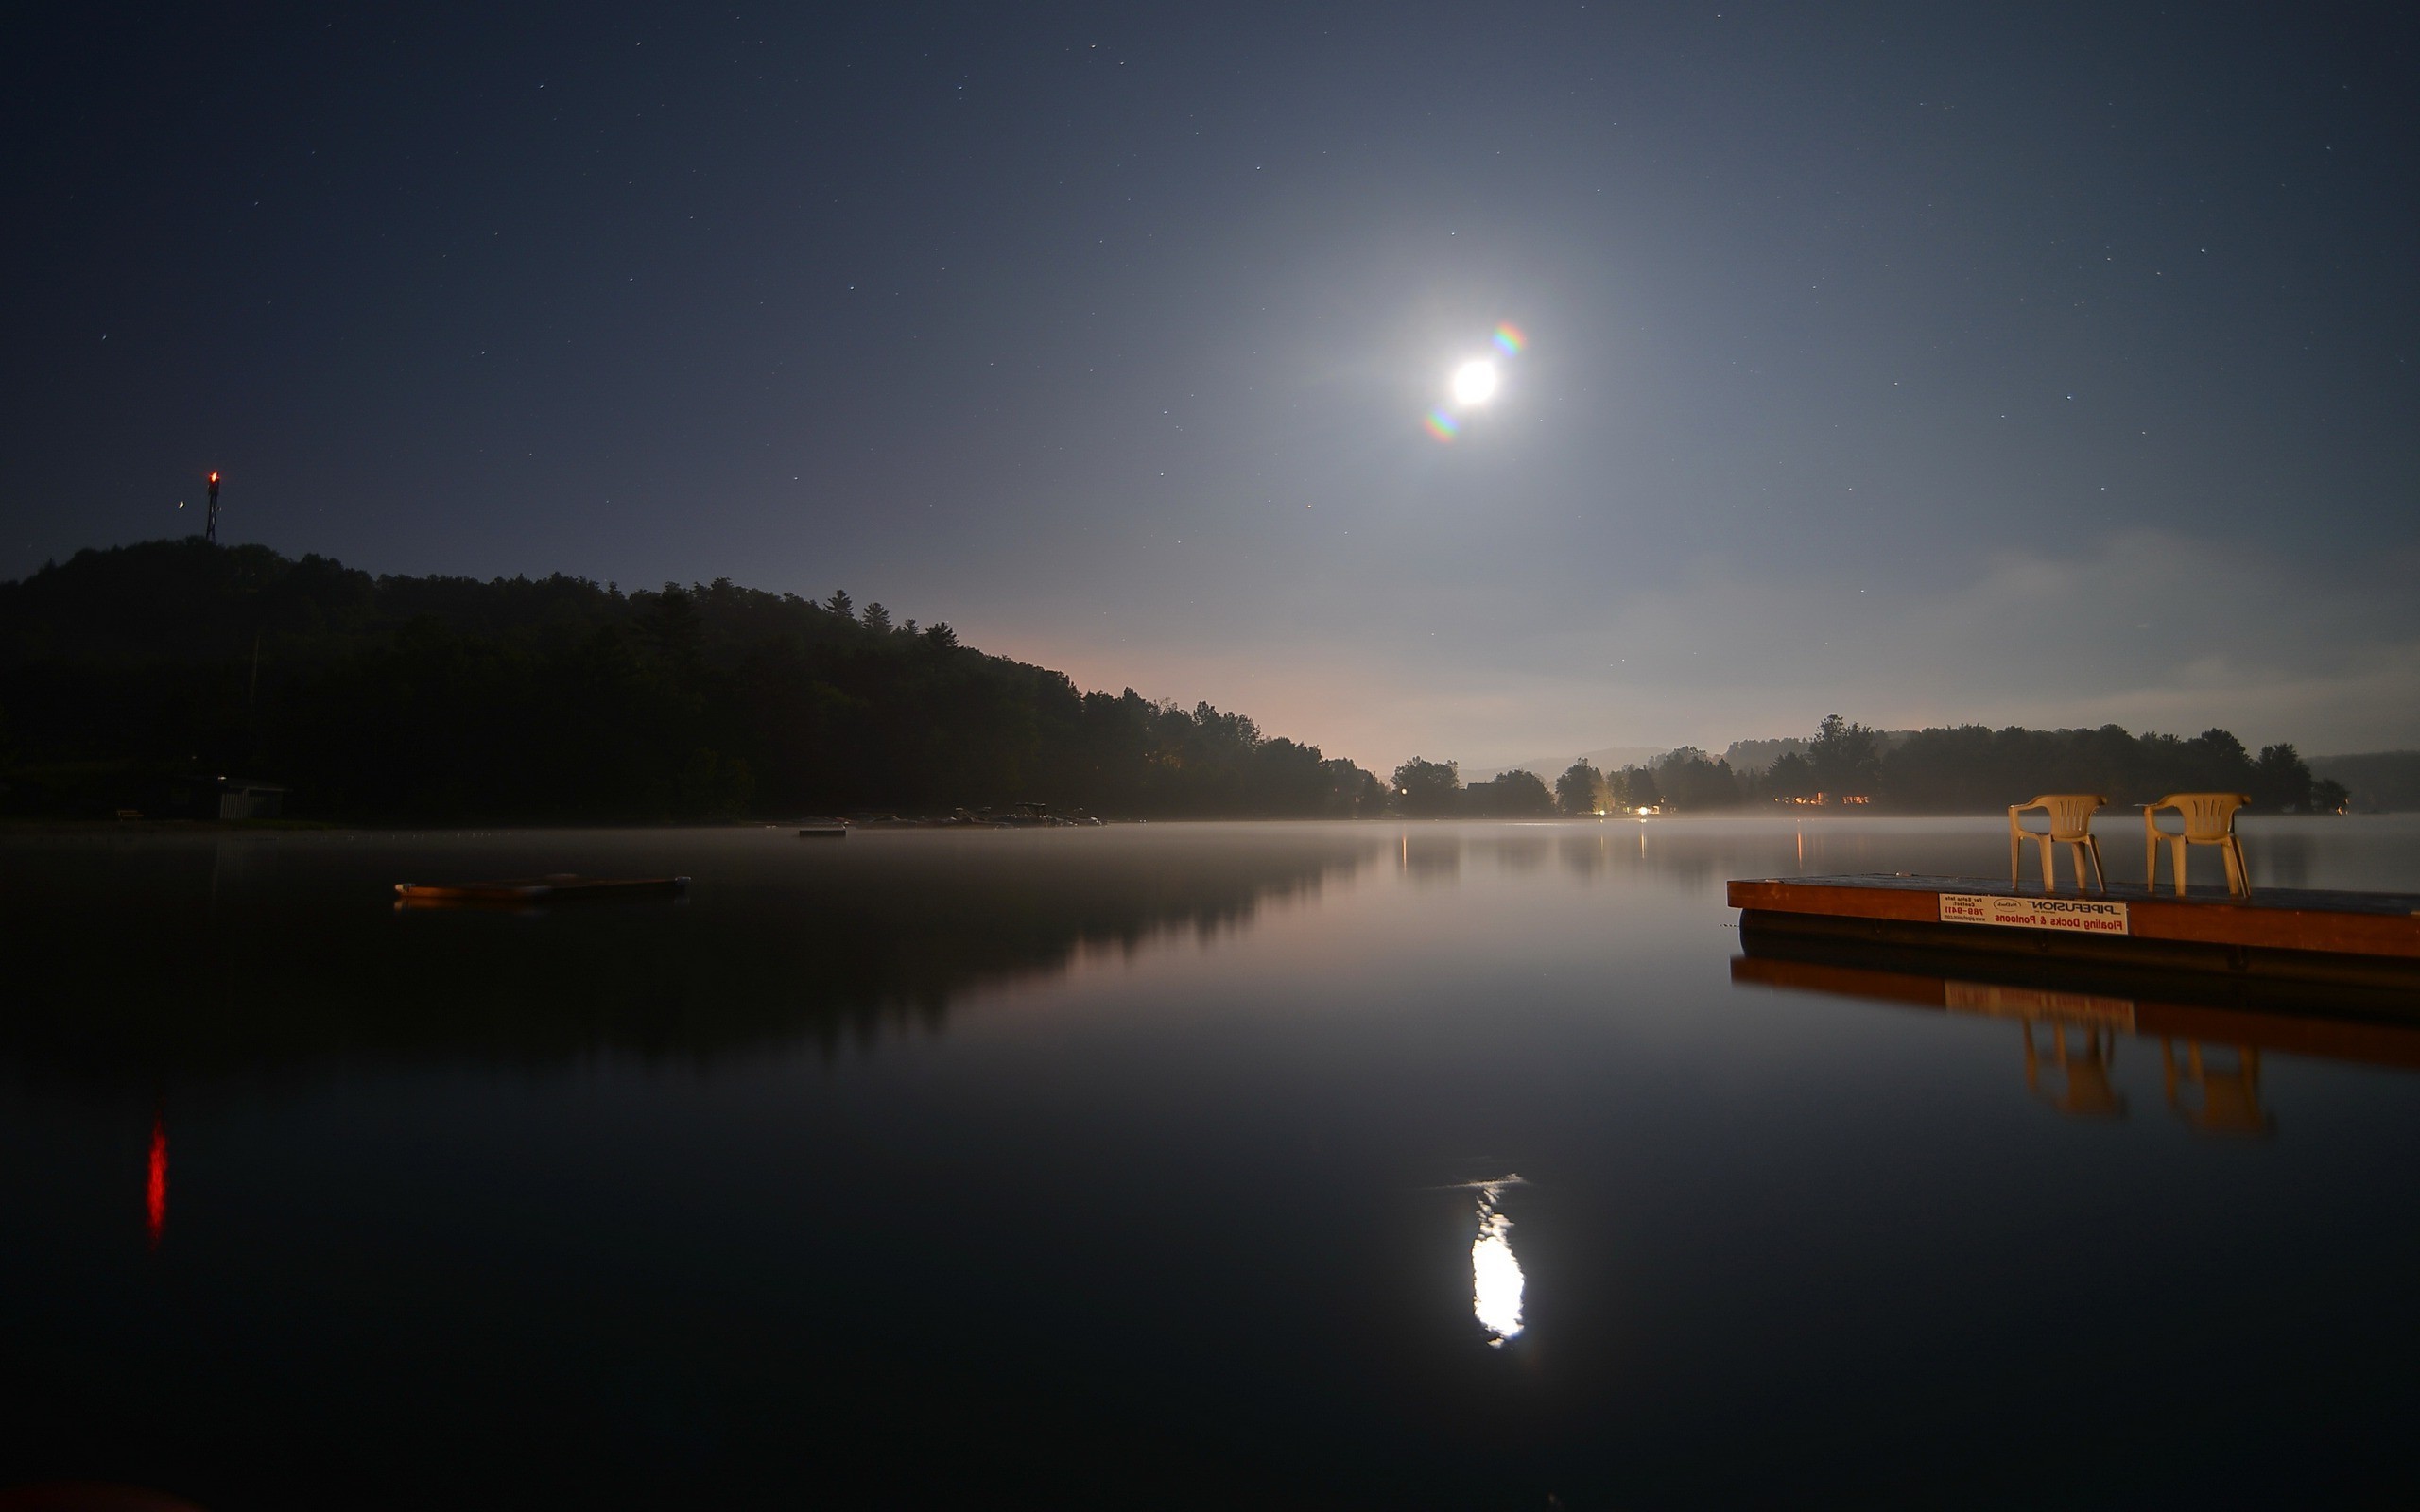 photography, Landscape, Water, Night, Moon, Reflection, Lake, Trees, Nature Wallpaper